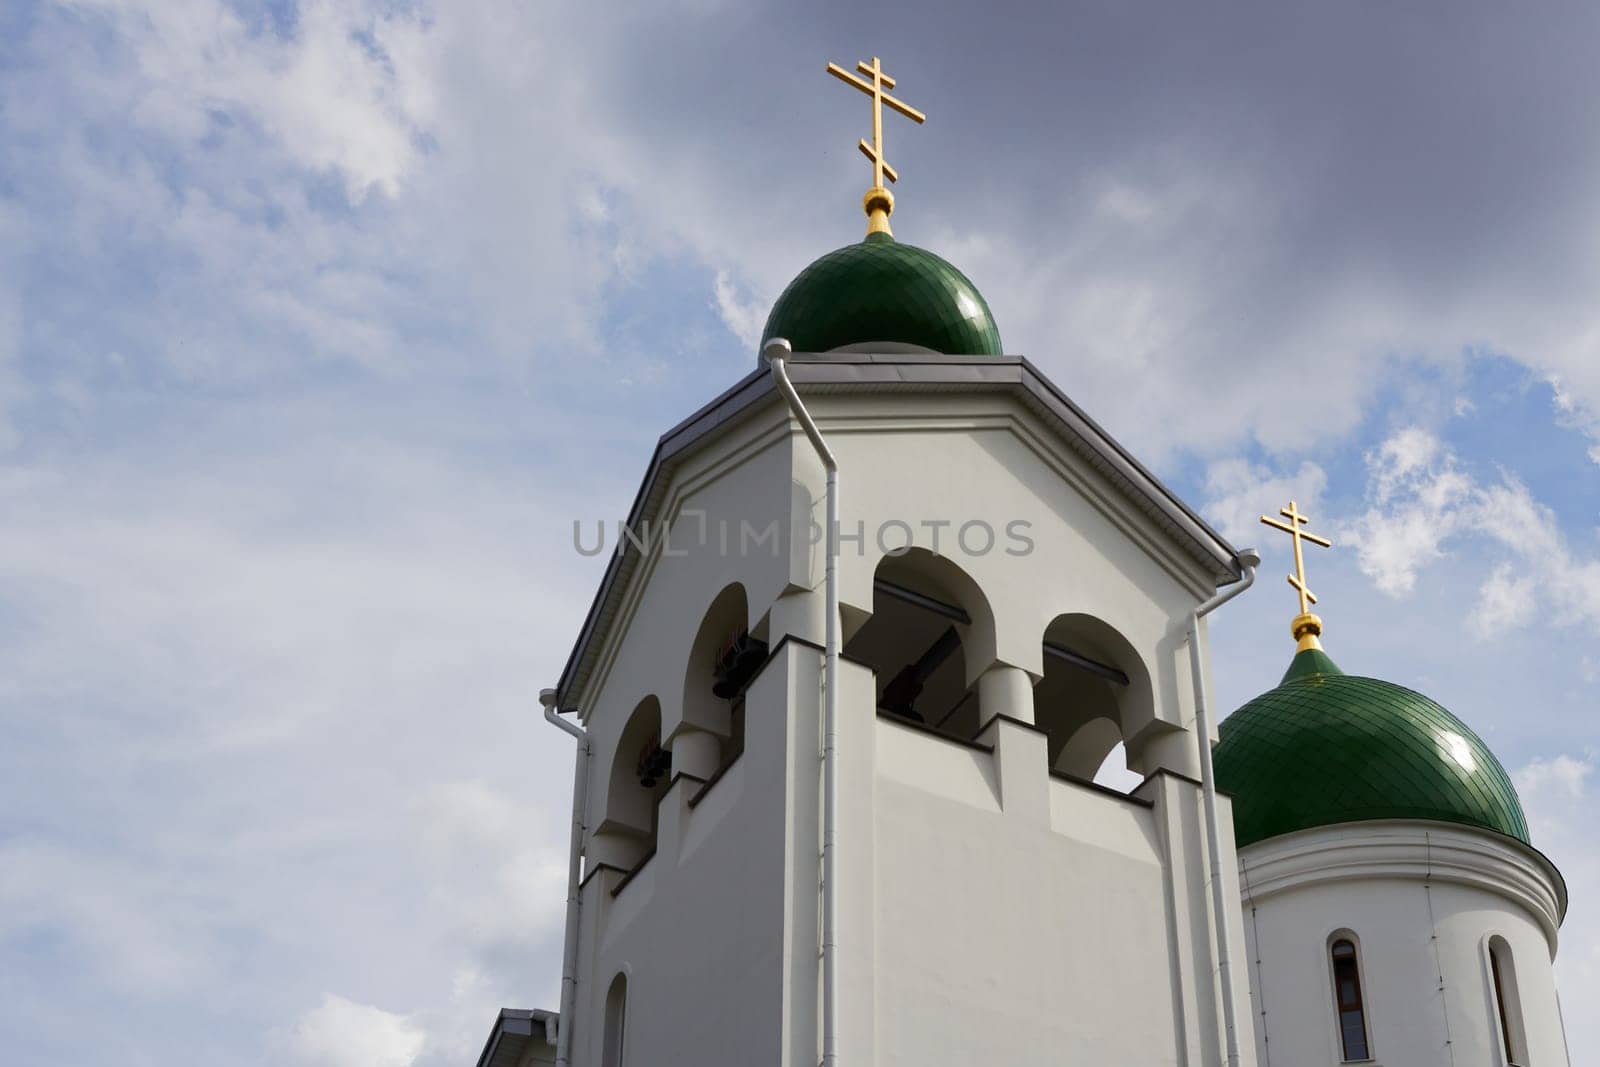 Photo of Orthodox church, bottom view of green domes with golden crosses.